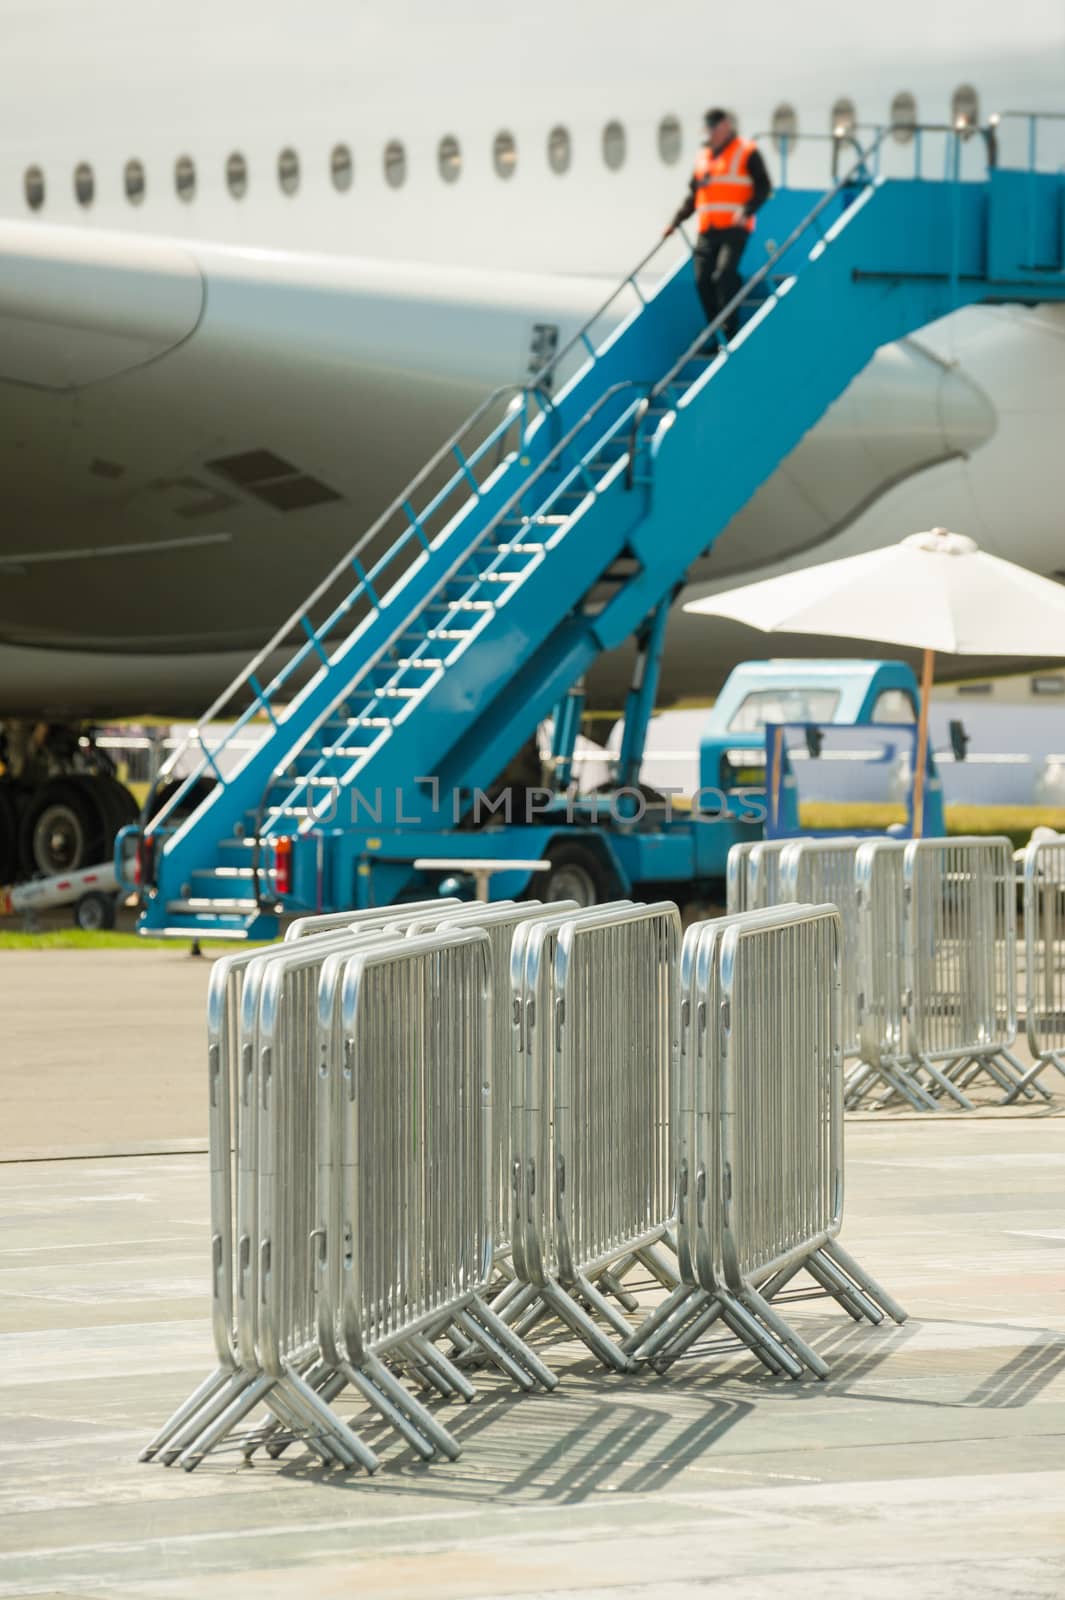 metal fencing barriers used to control the flow of passengers at an airport